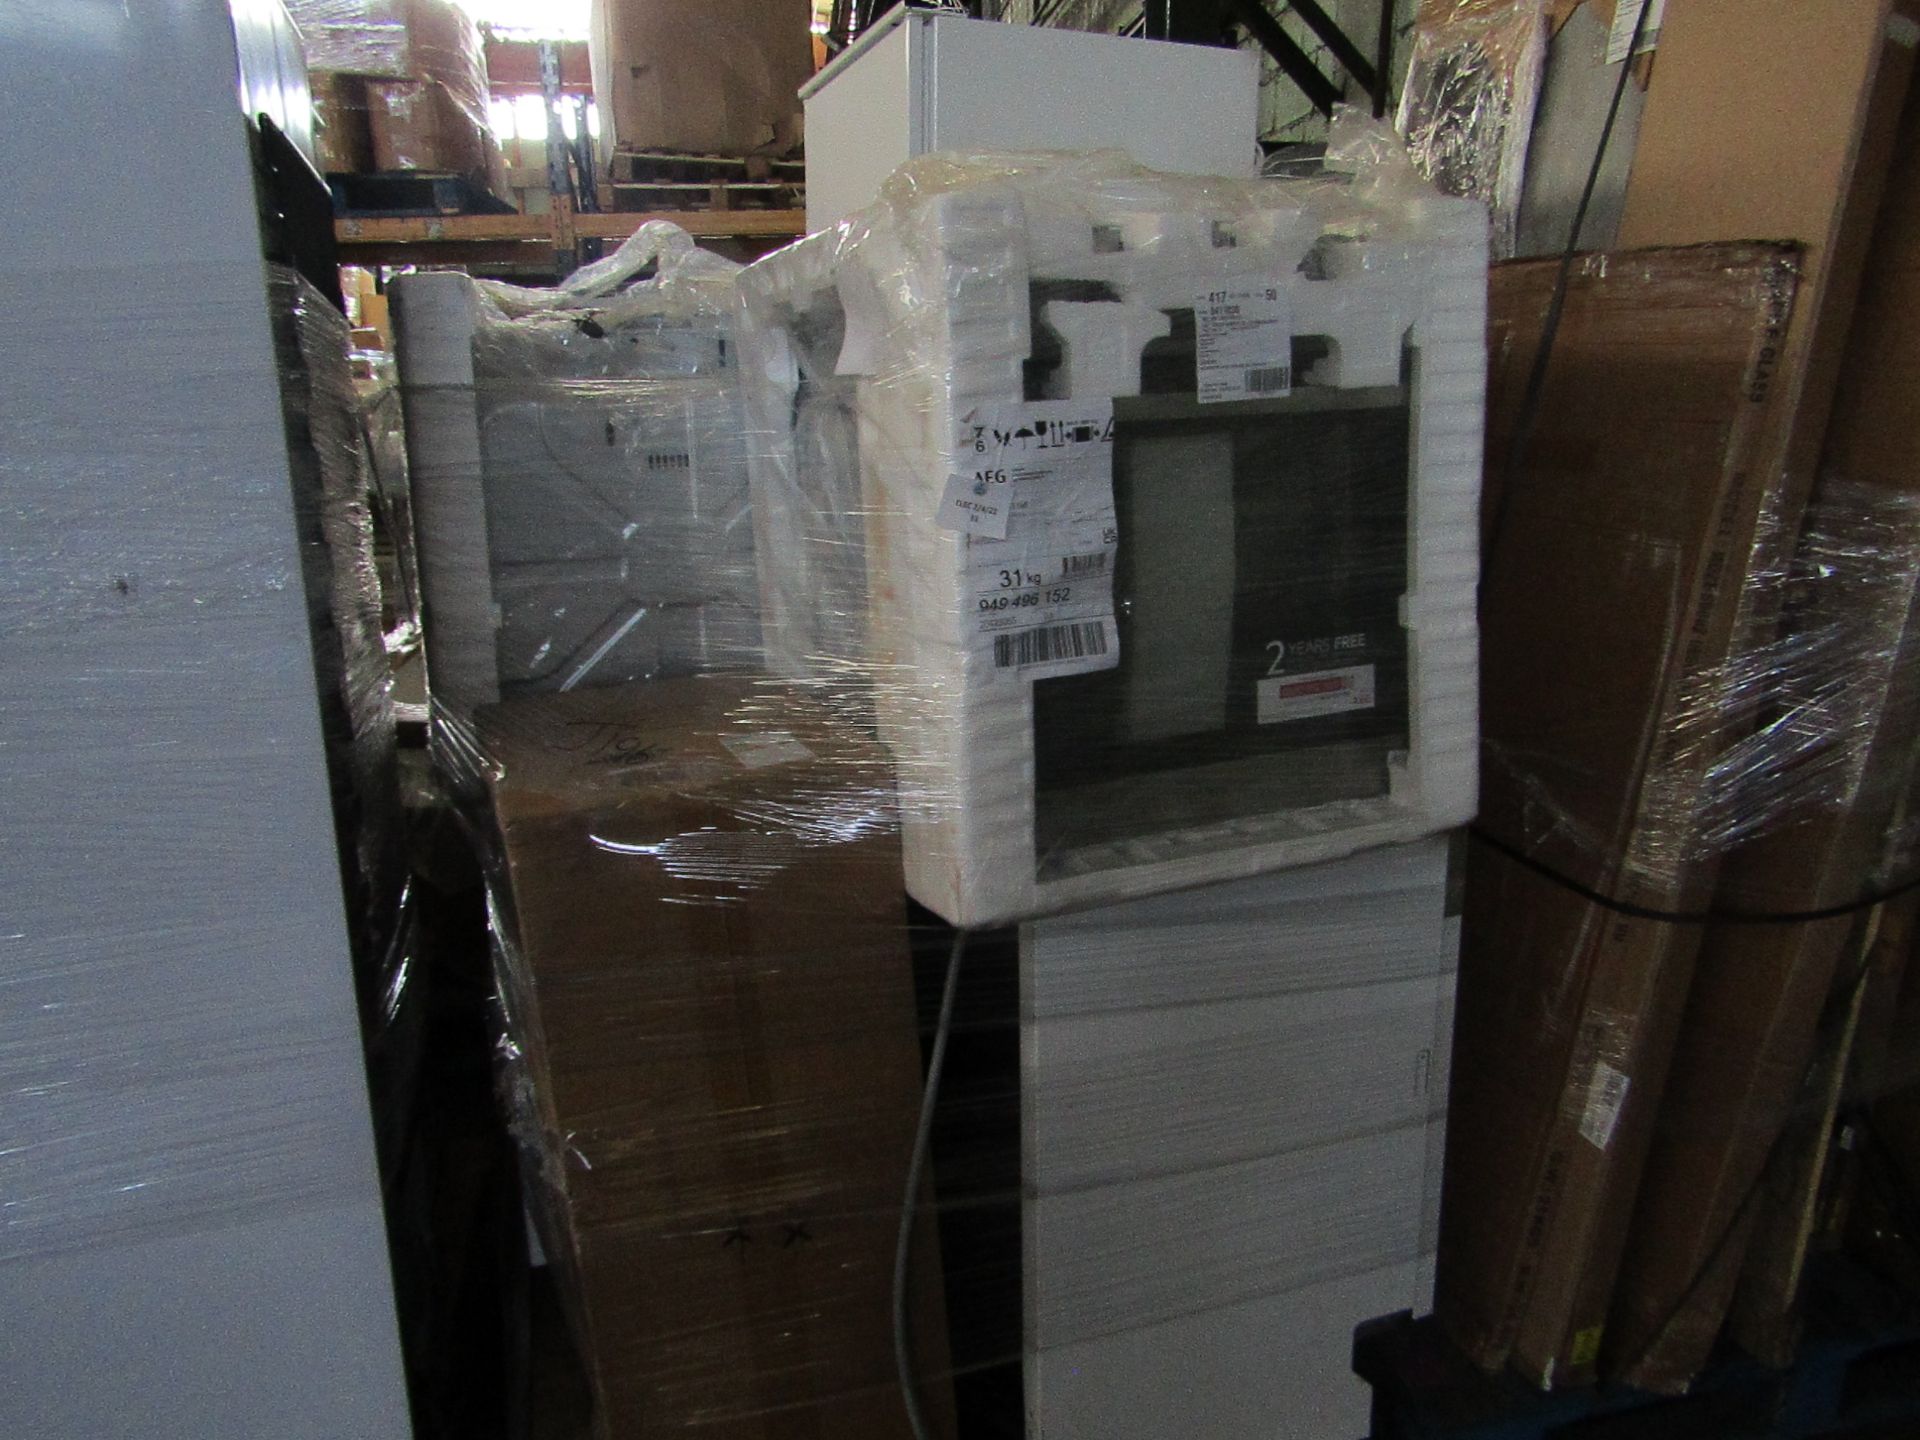 PALLET OF CUSTOMER RETURN ELECTRICAL ITEMS. ALL UNCHECKED FOR PARTS/WORKING. VIEWING IS